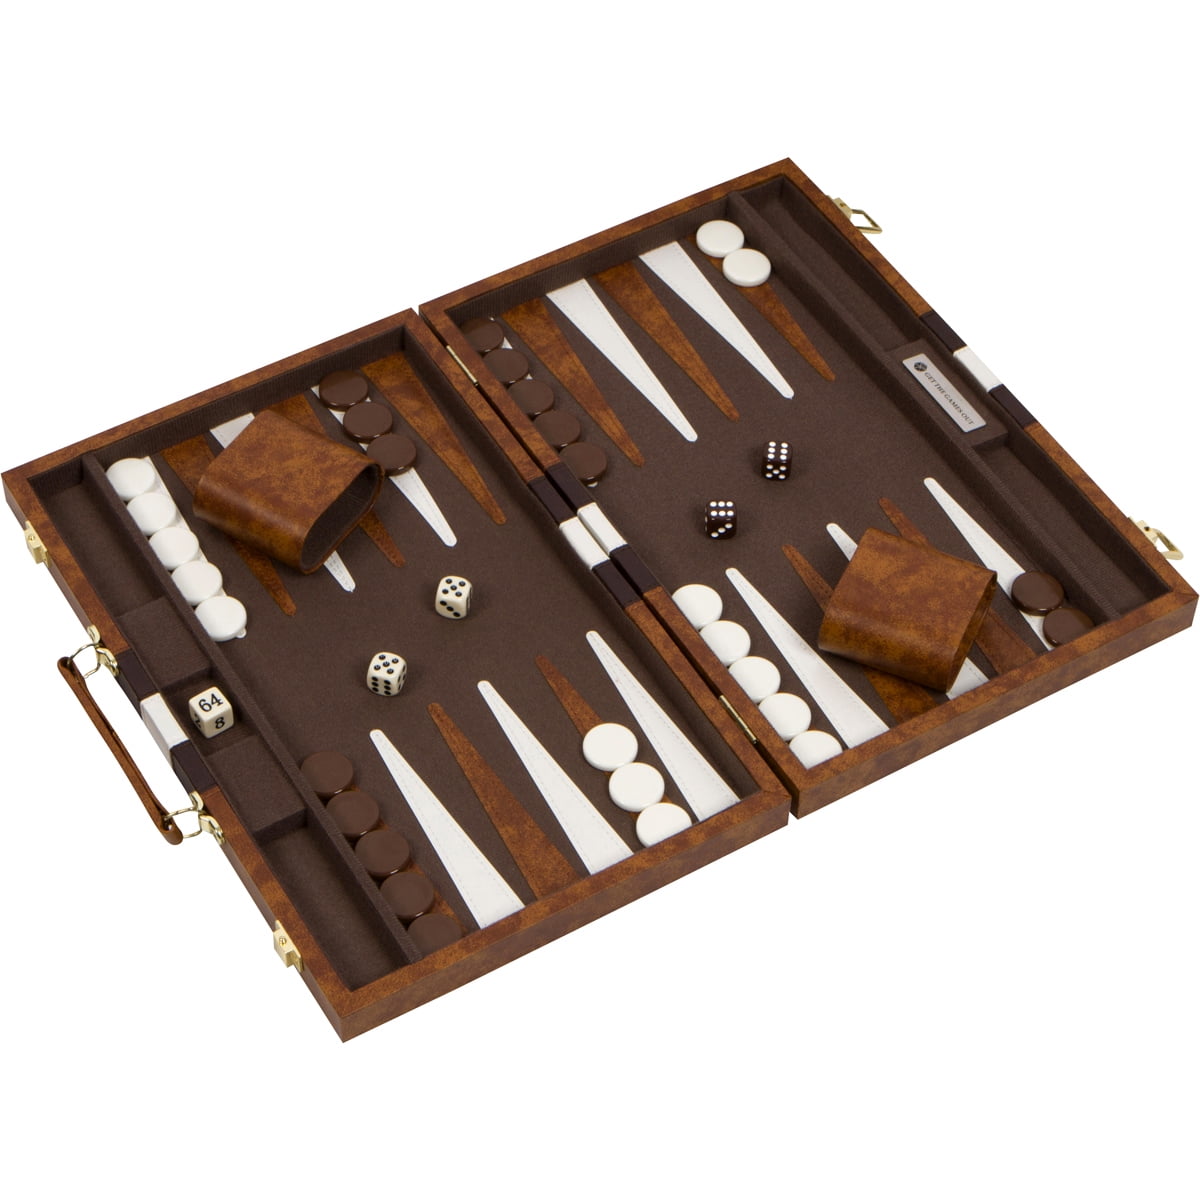 Get The Games Out Top Backgammon Set Classic Board Game Case Best 